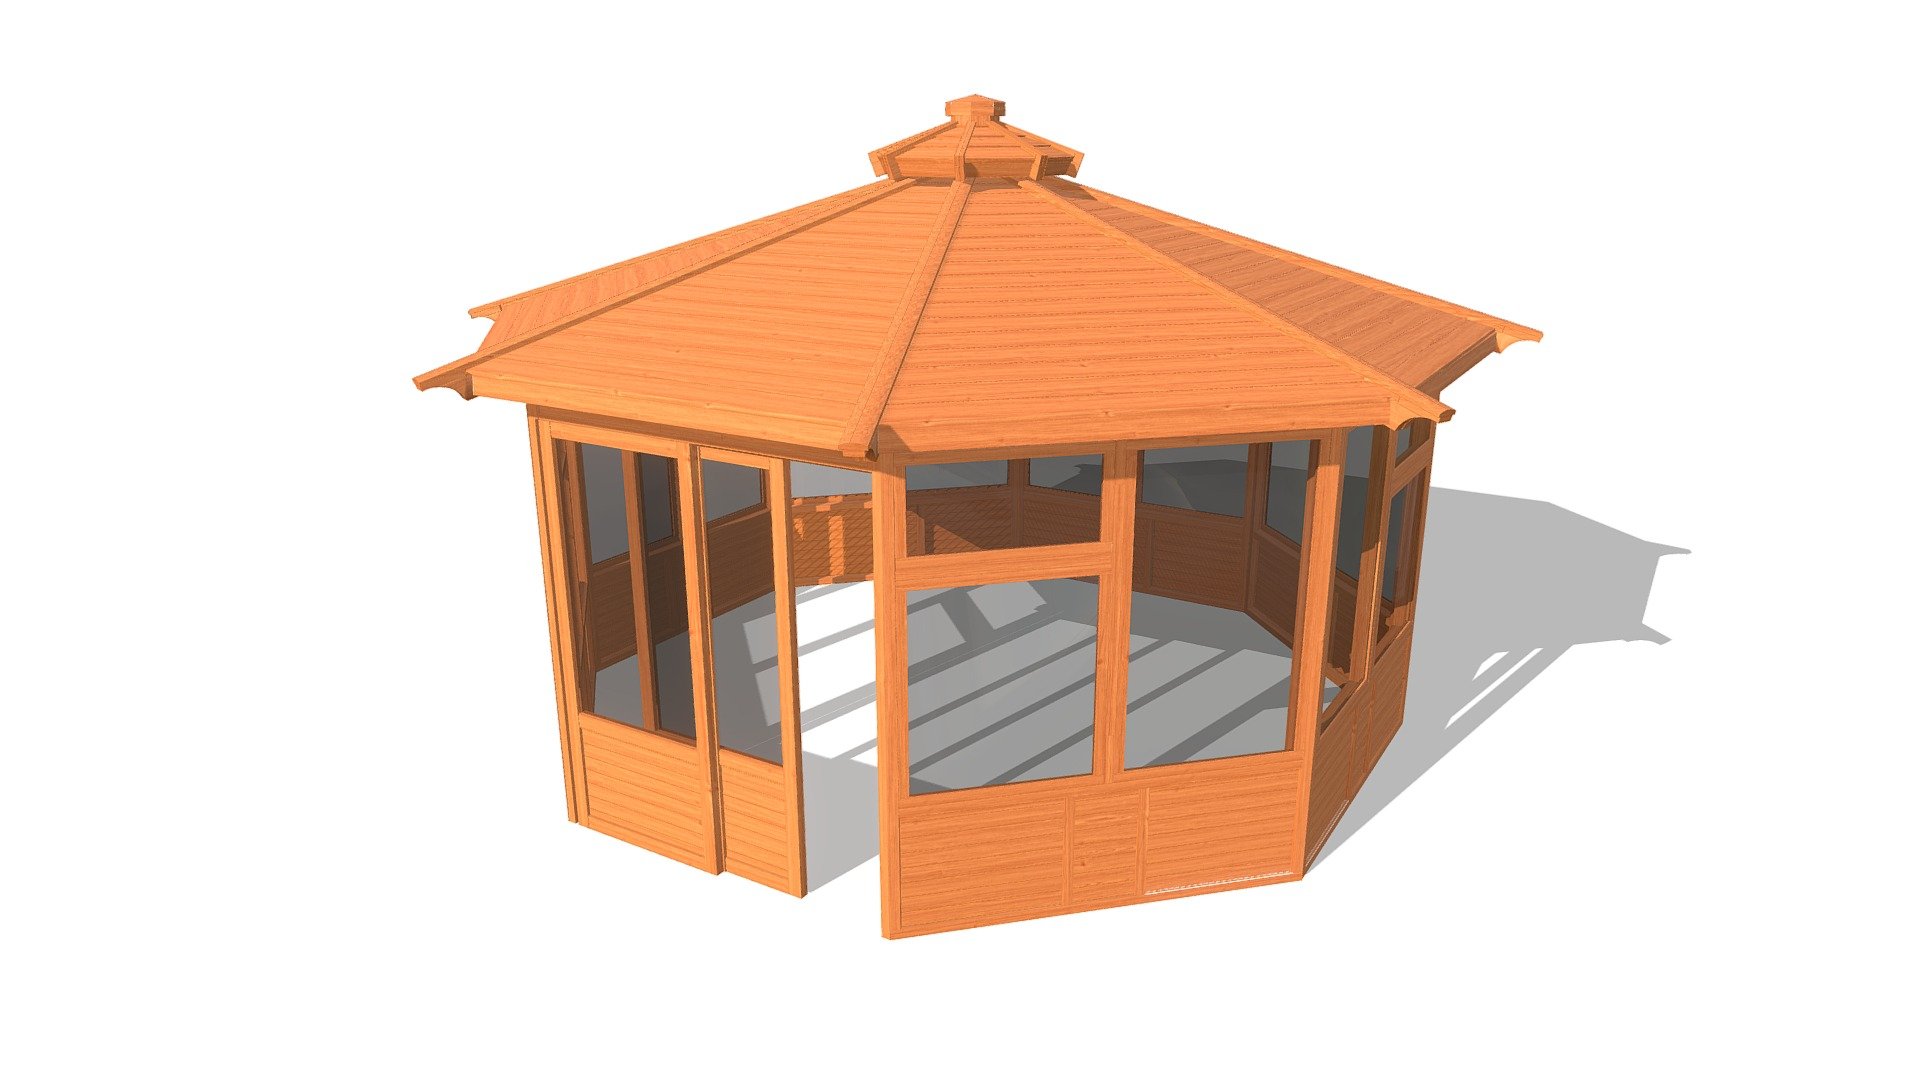 Custom Project
•2x5 Posts Wall
•2x3 Posts Door
•1x6 T&amp;G
•2x6 Rafters
•2x6 Fascia

→ Size: Ø 15' 

→ Drawn by Aislinn Torres
aislinn@foreverredwood.com

→ https://www.foreverredwood.com/ ← - Custom Octagonal Sunroom Gazebo - 3D model by Forever Redwood Conceptual Engineering Team 3d model